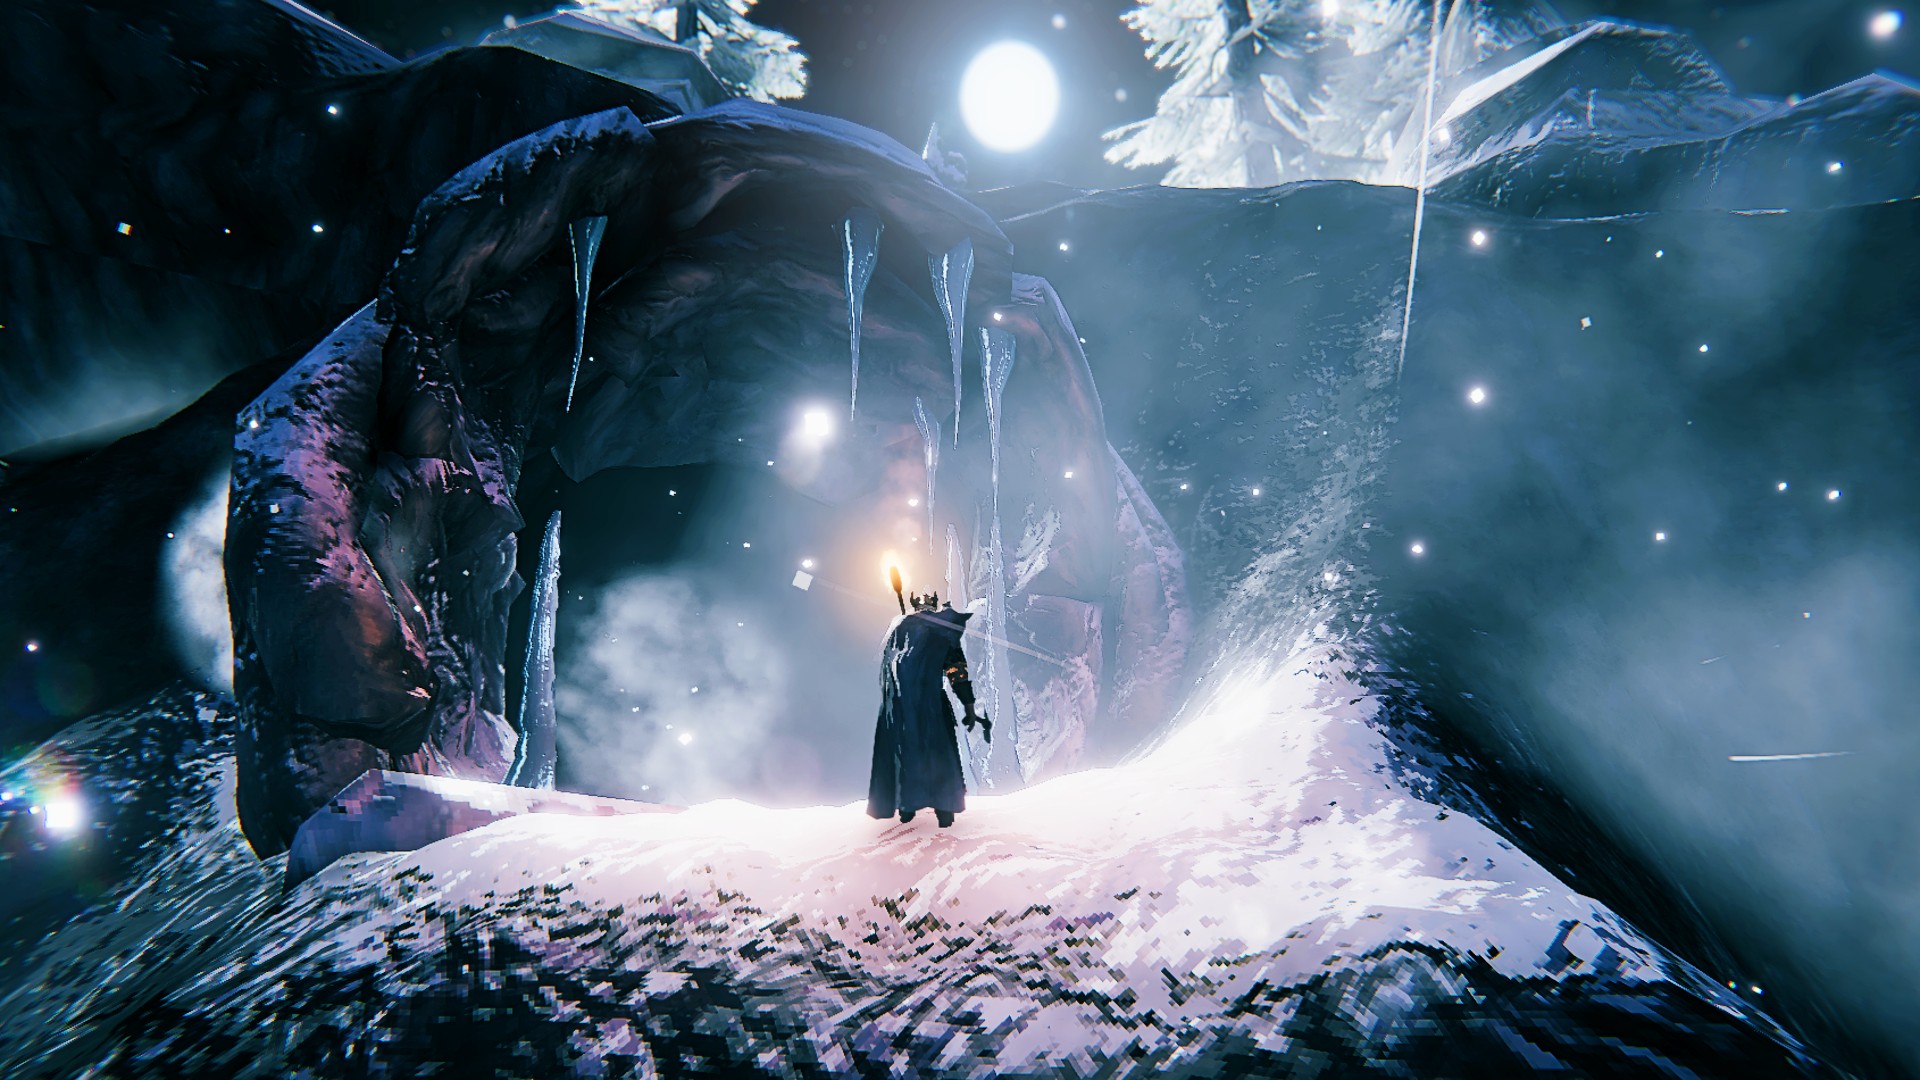 Valheim update adds Frost Cave dungeons stuffed with loot